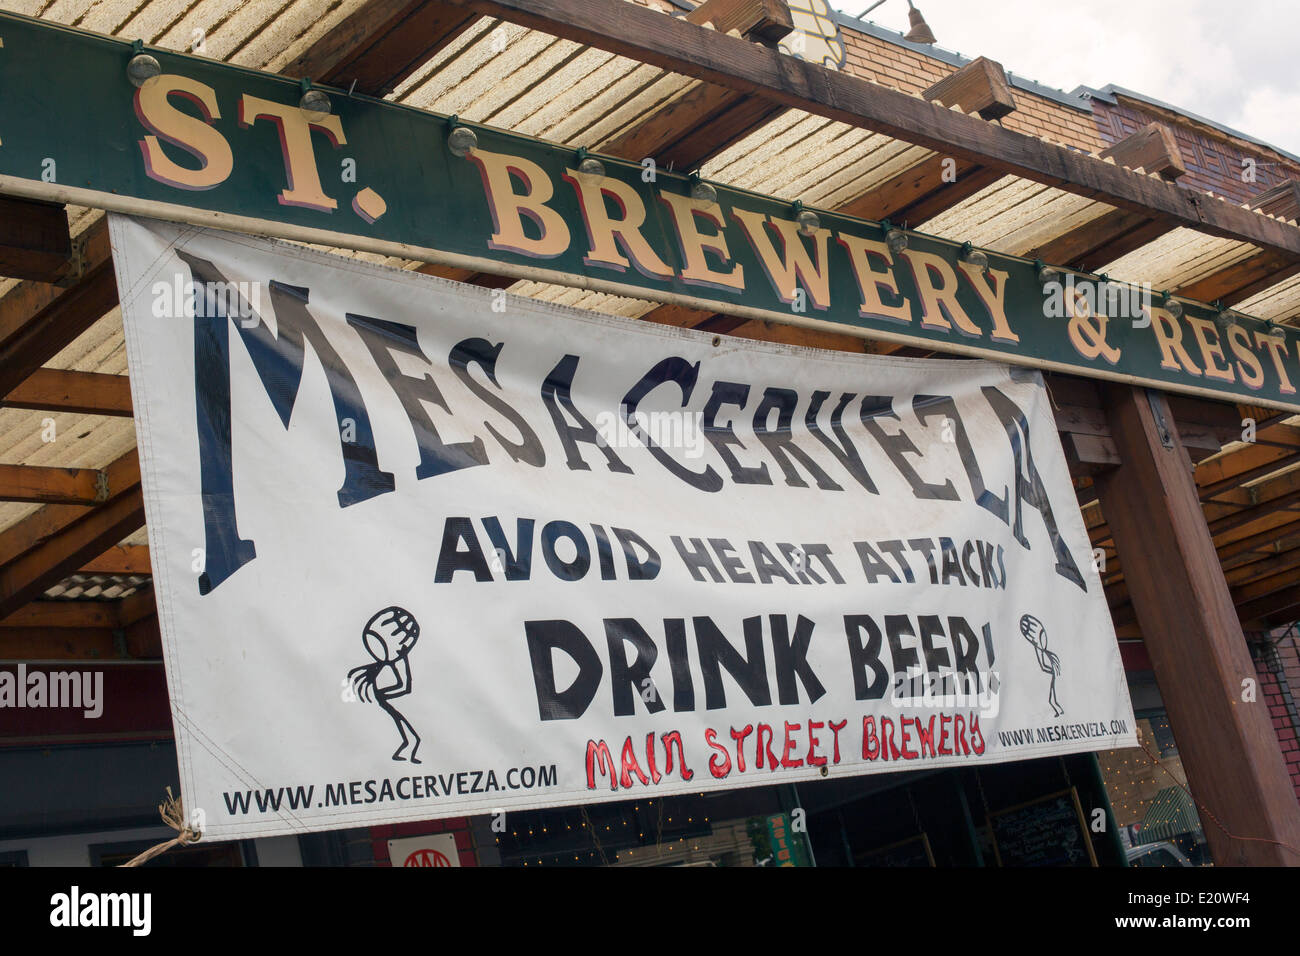 Cortez, Colorado - A sign outside the Main Street Brewery, a brew pub, advises people to 'avoid heart attacks - drink beer.' Stock Photo